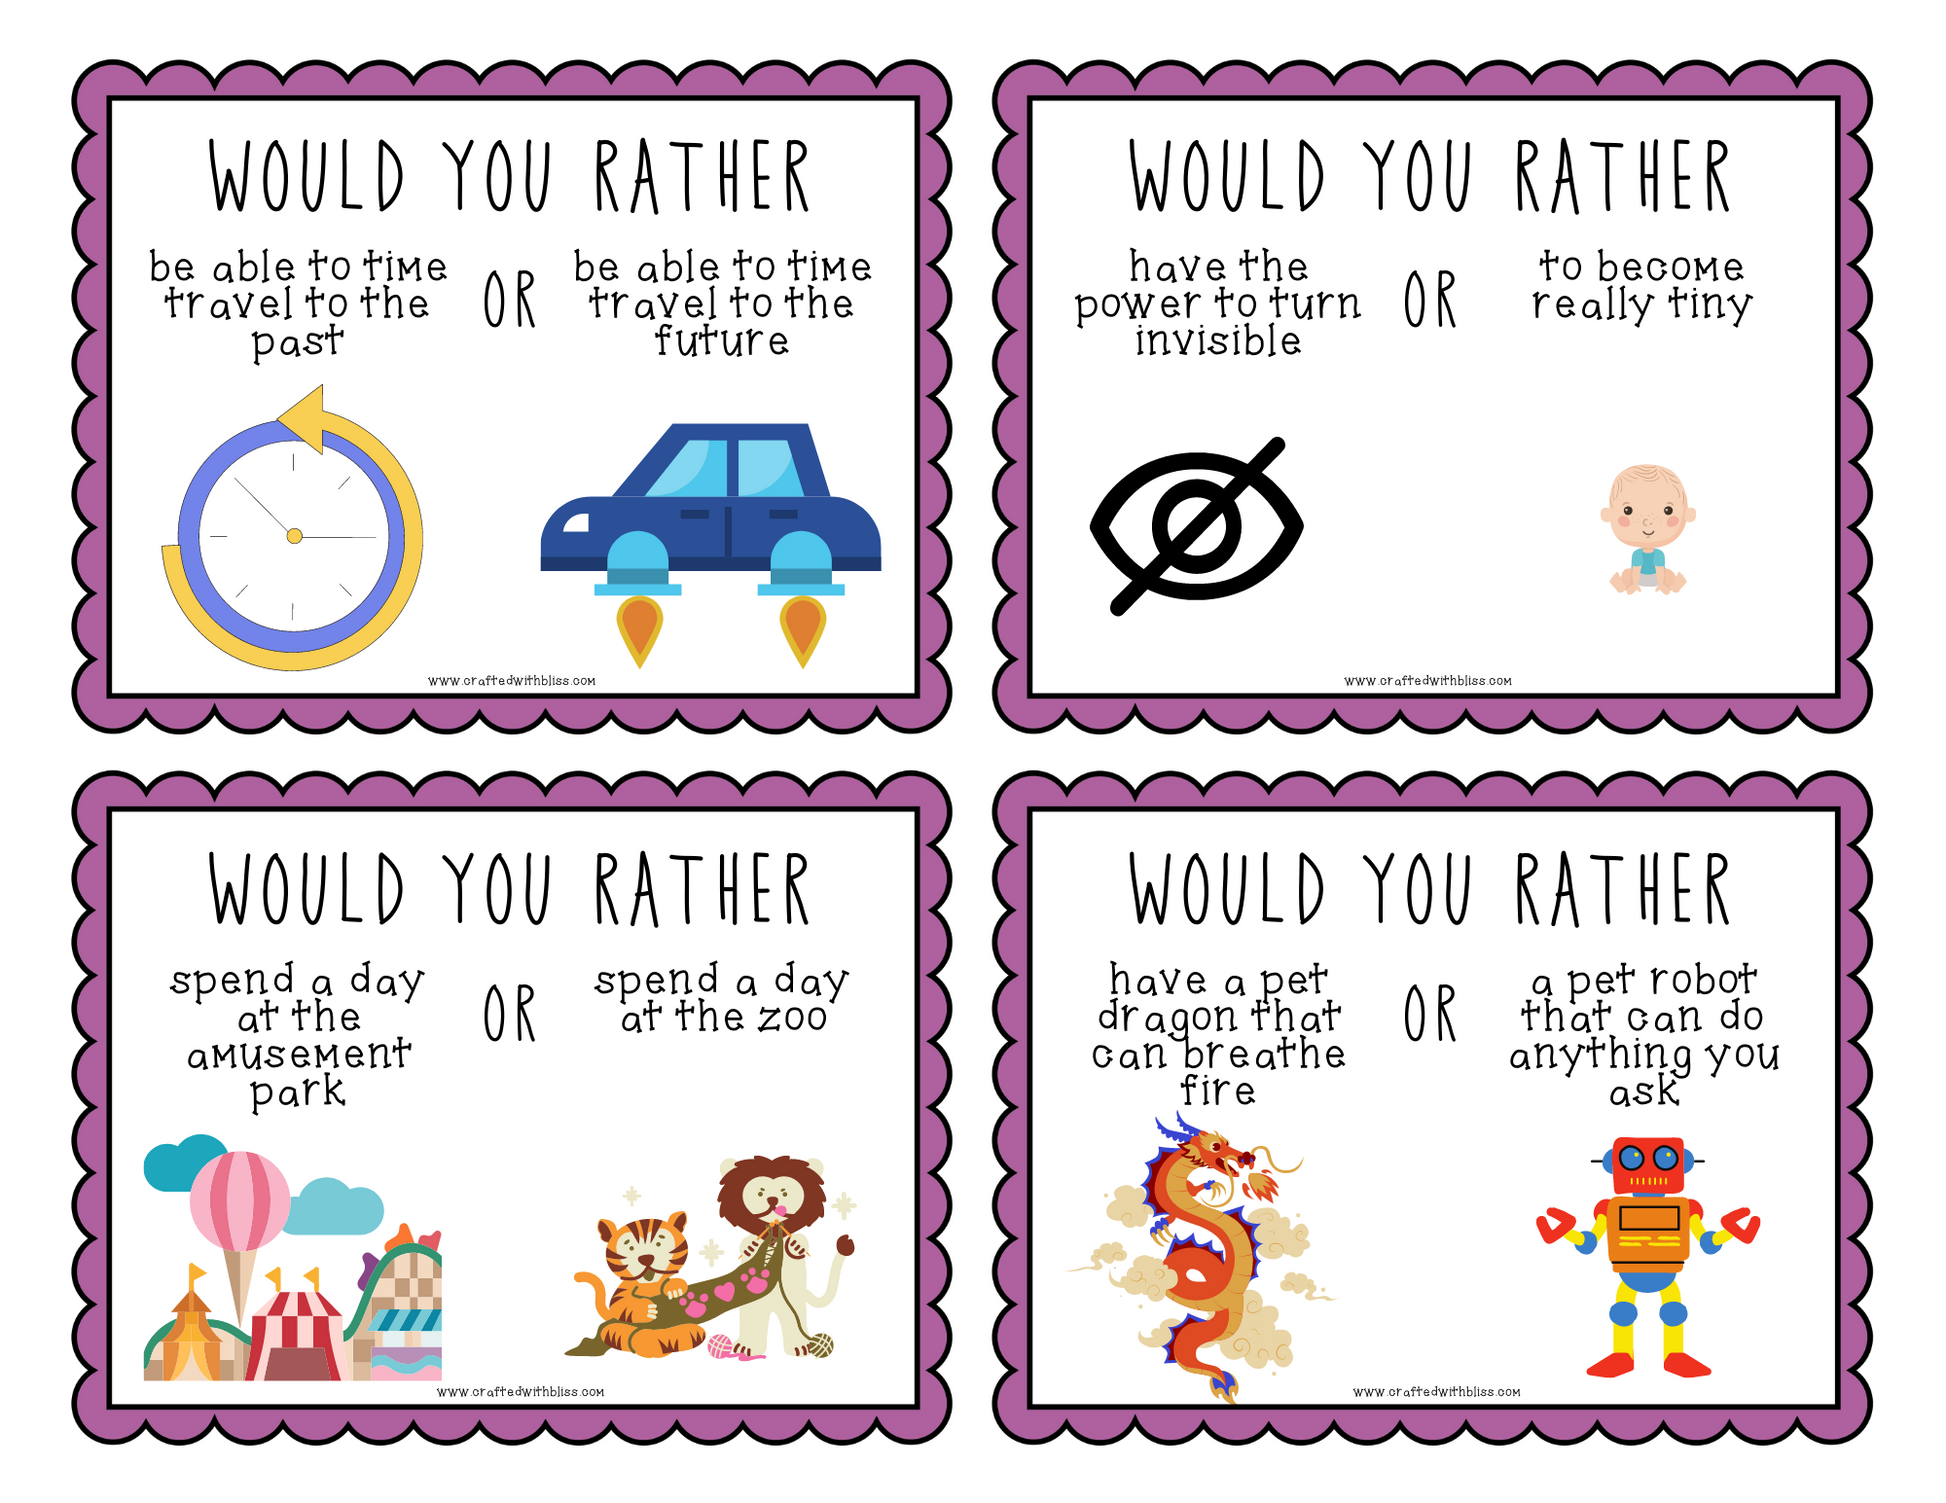 Conversation Fun: 140 Would you Rather Cards